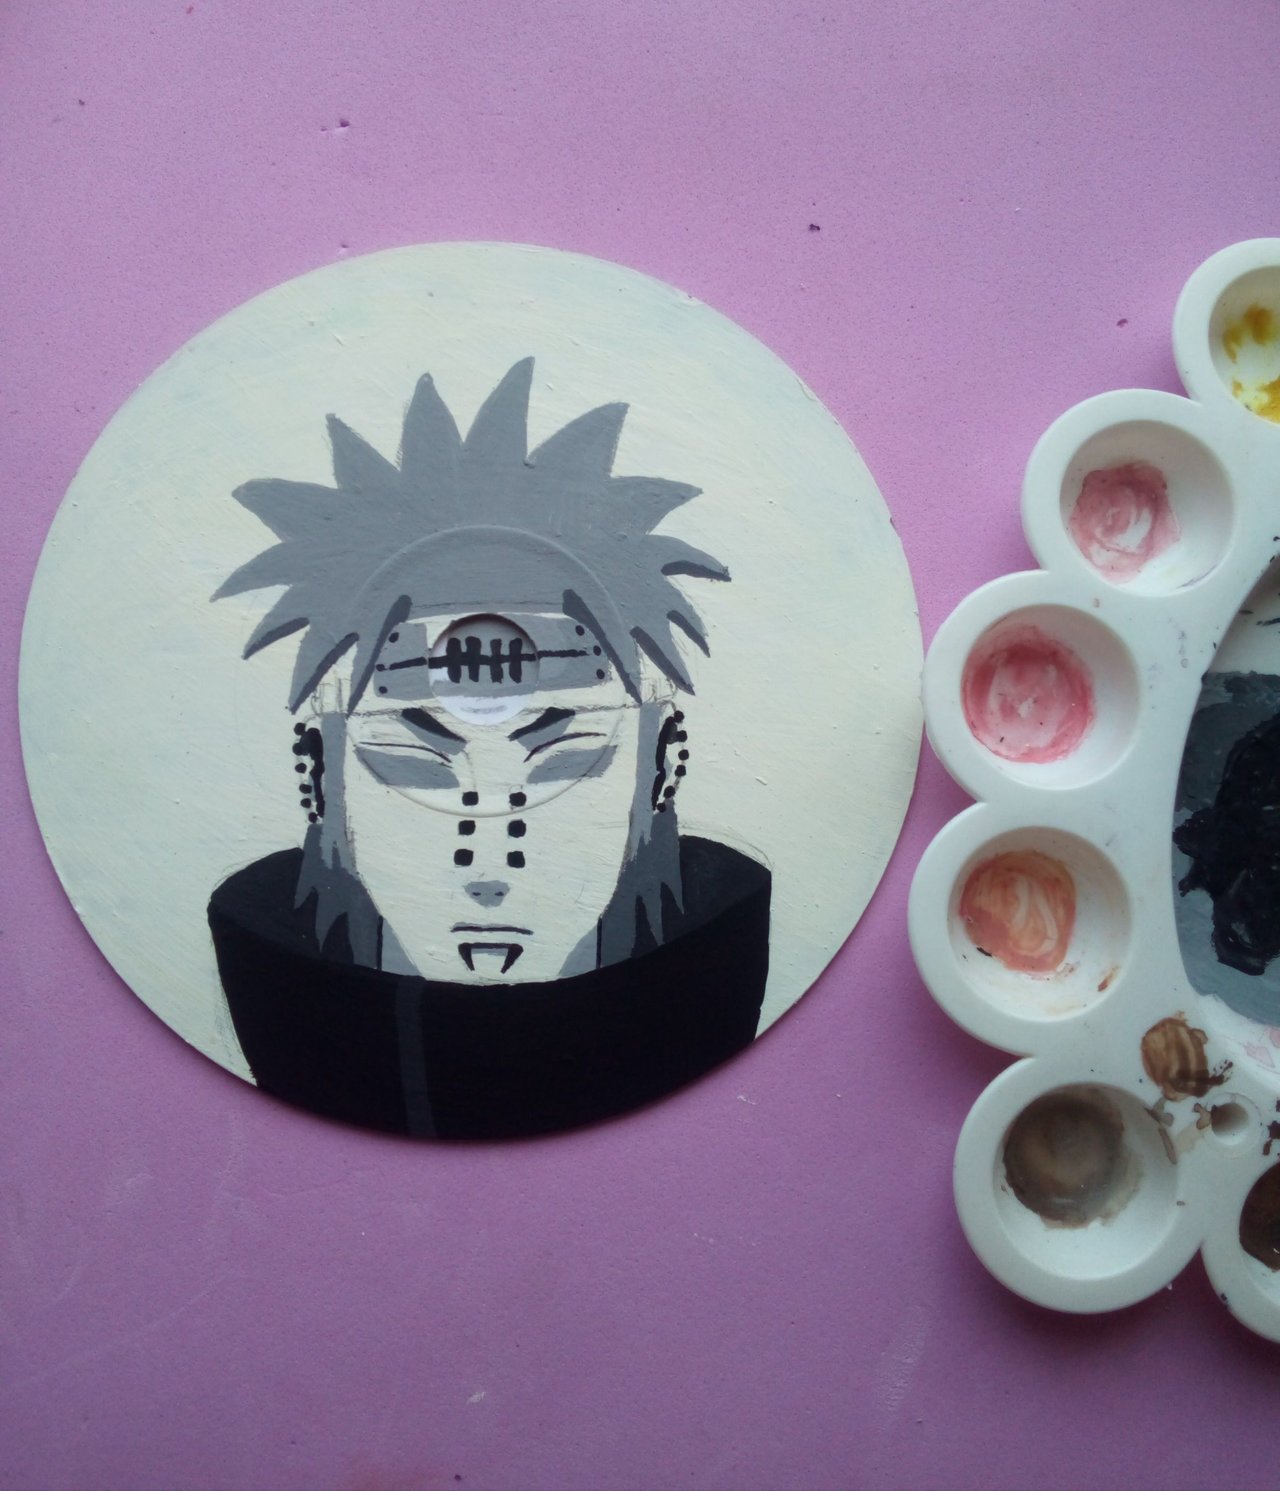 Pintando A Pain De Naruto Sobre Discos De Cds Viejos Painting Pain From Naruto On Old Cd Discs Peakd